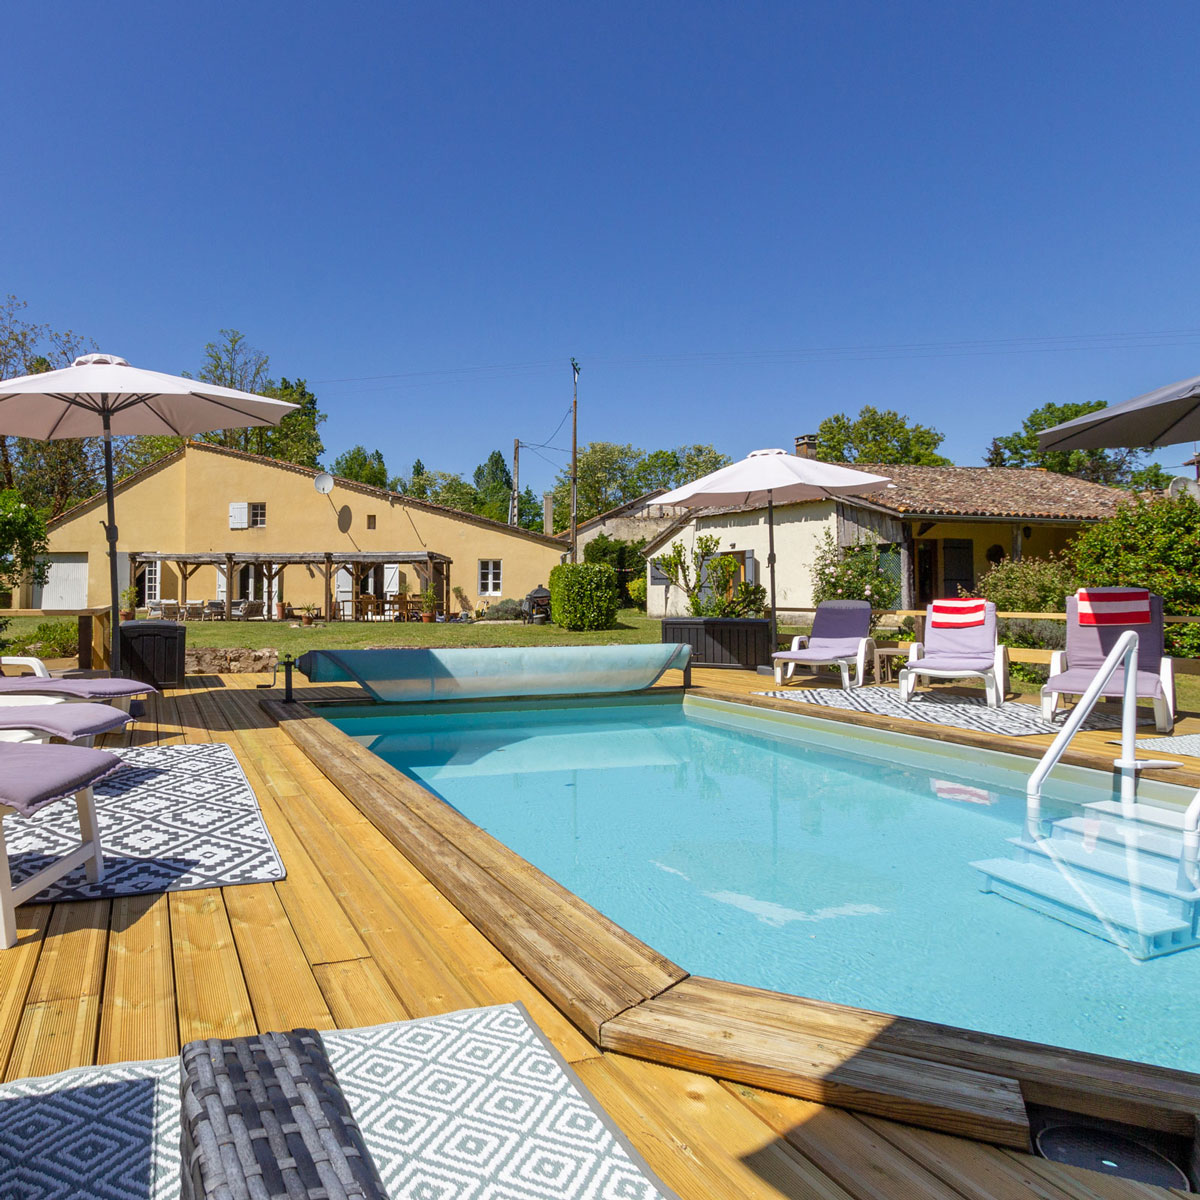 Maison de Tilleul holiday villa in SW France near Duras and Monsegur with a private heated swimming pool